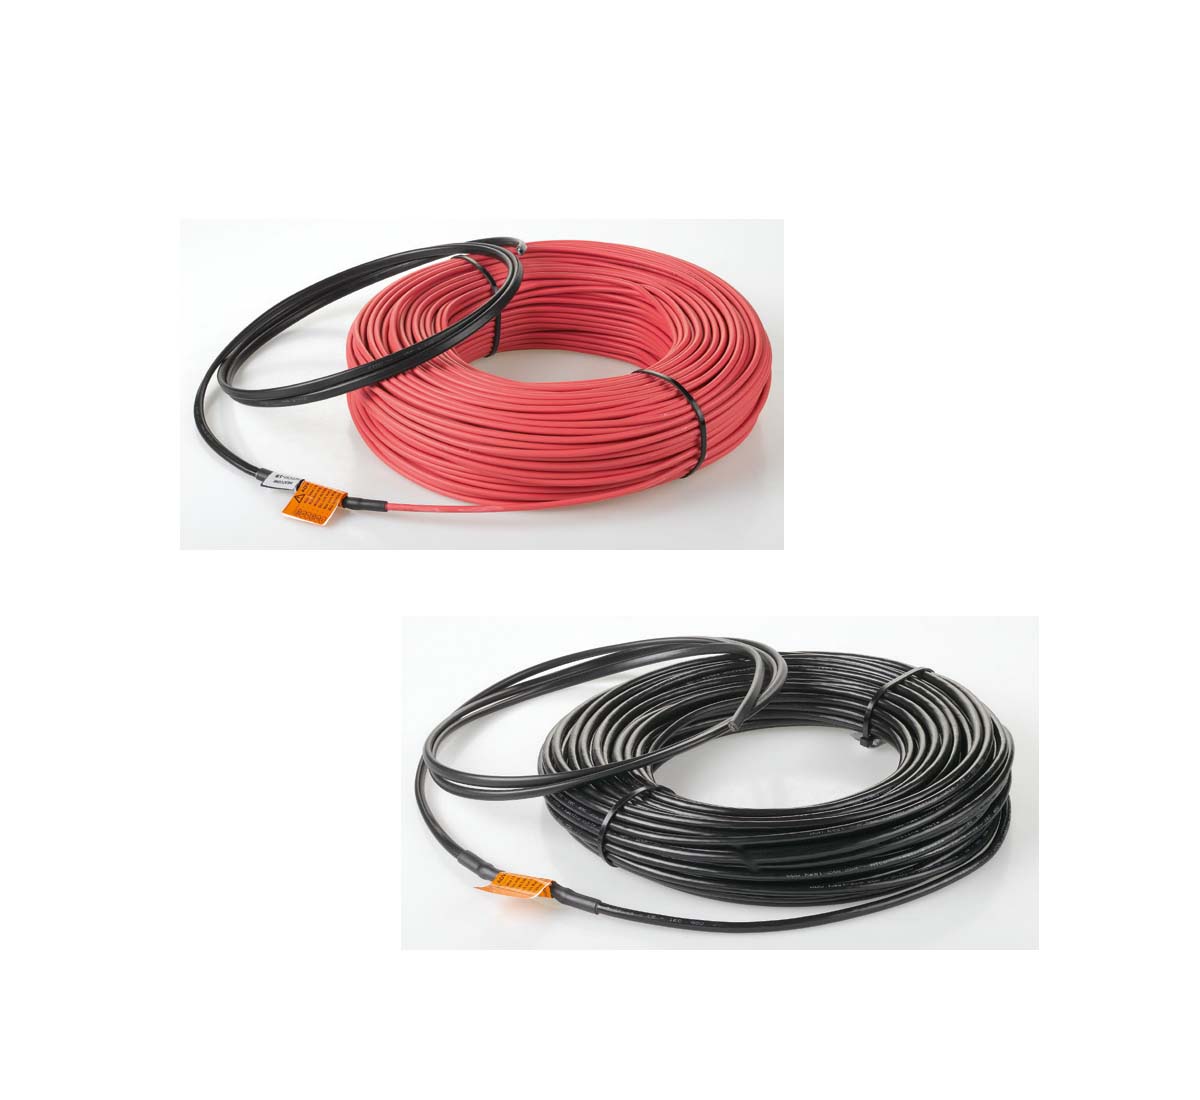 A picture of a two different heating cables from Backer